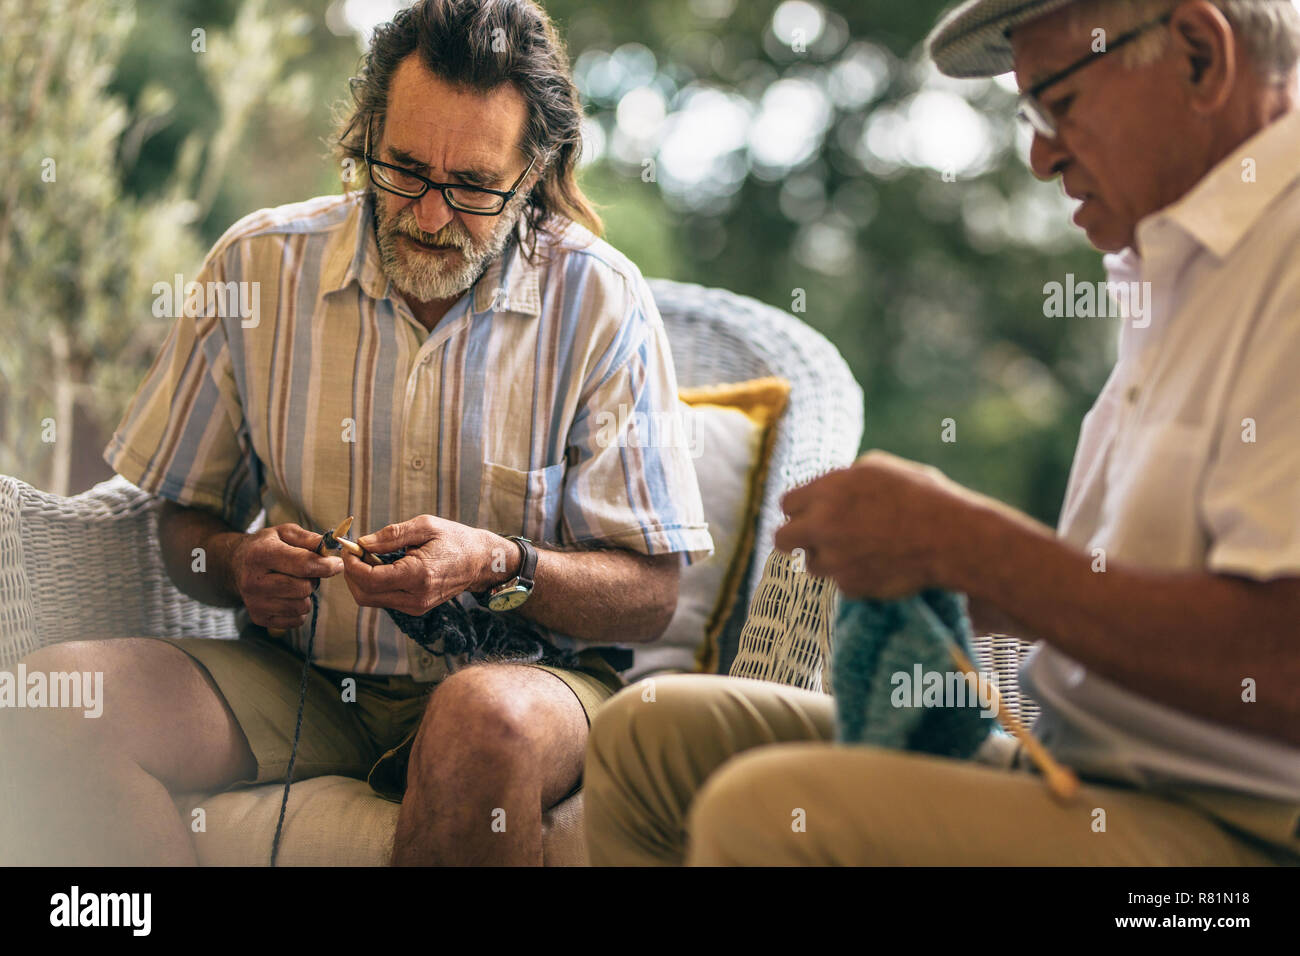 Two elderly men learning knitting at old age. Retired male friends doing knitting to pastime at home. Stock Photo